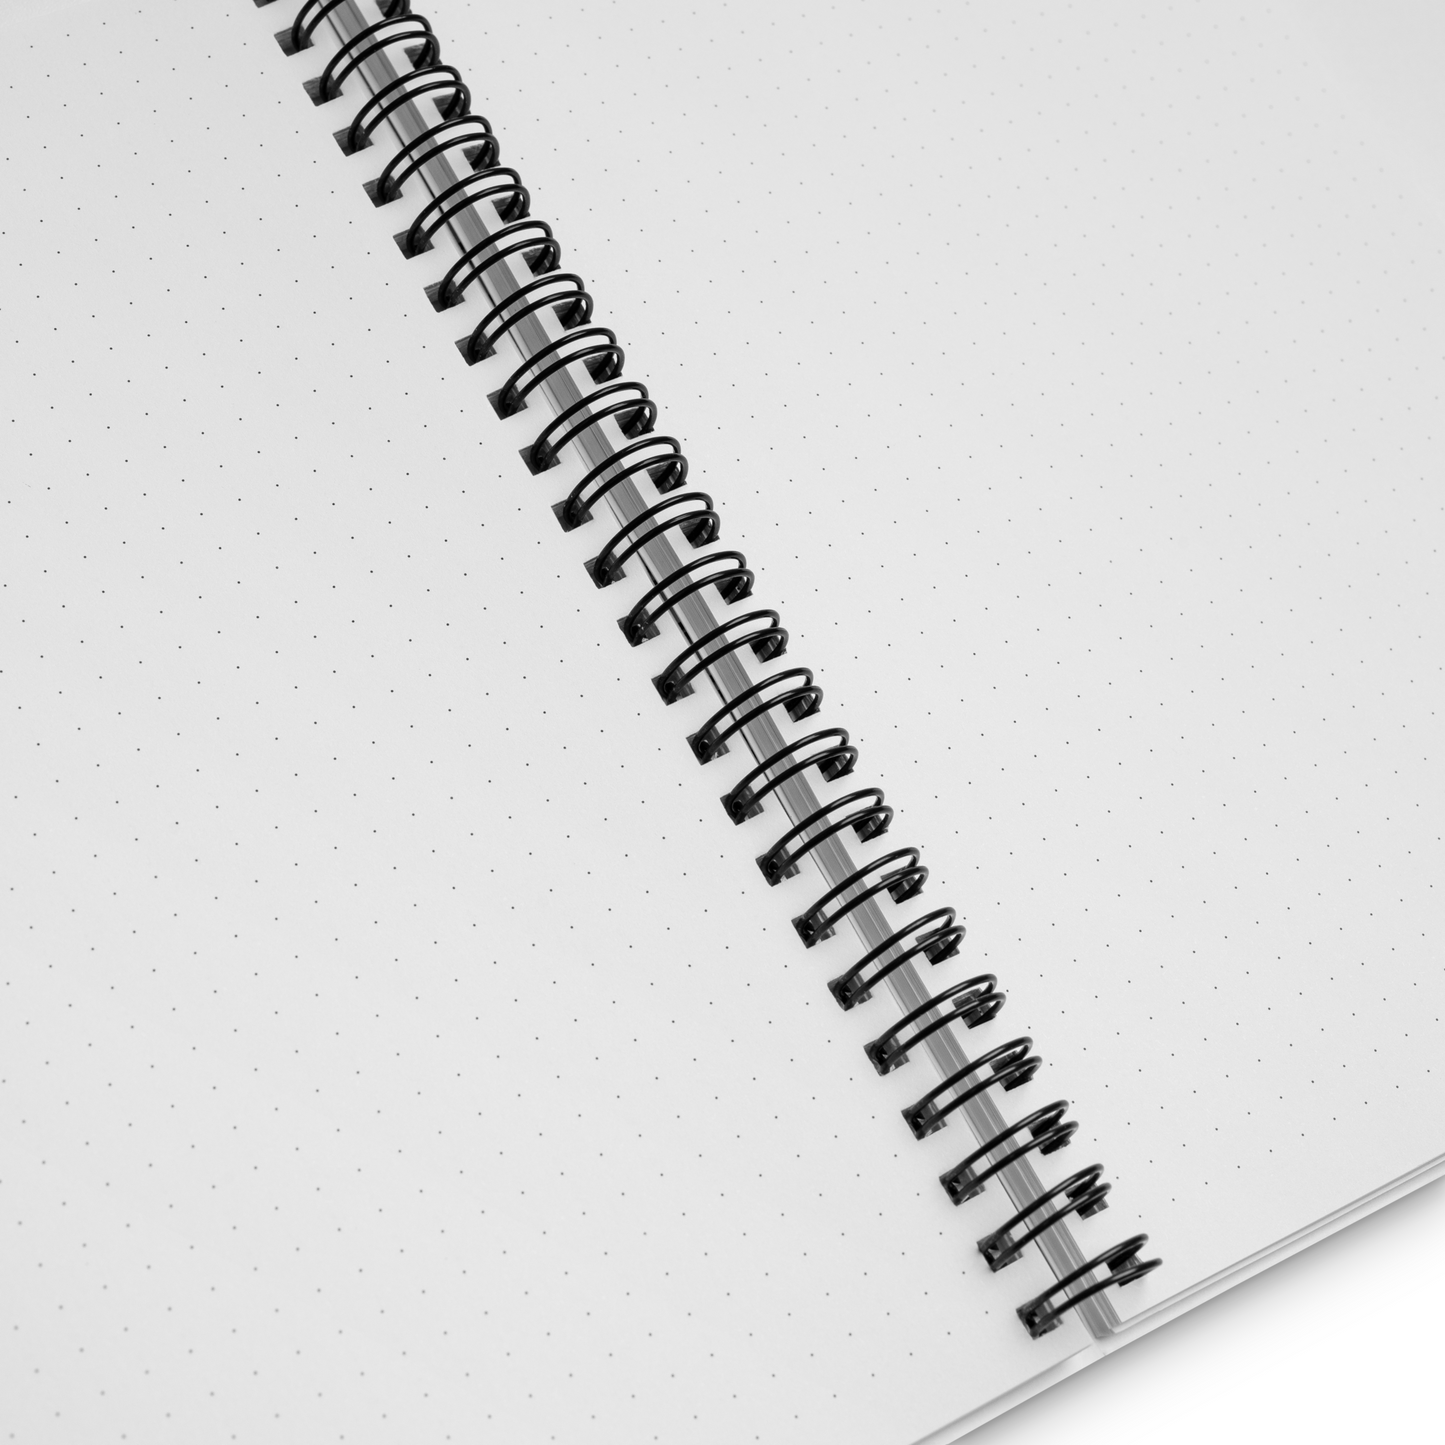 A close-up image of a wire-bound notebook with dot-grid pages. The o-rings binding the notebook are black.